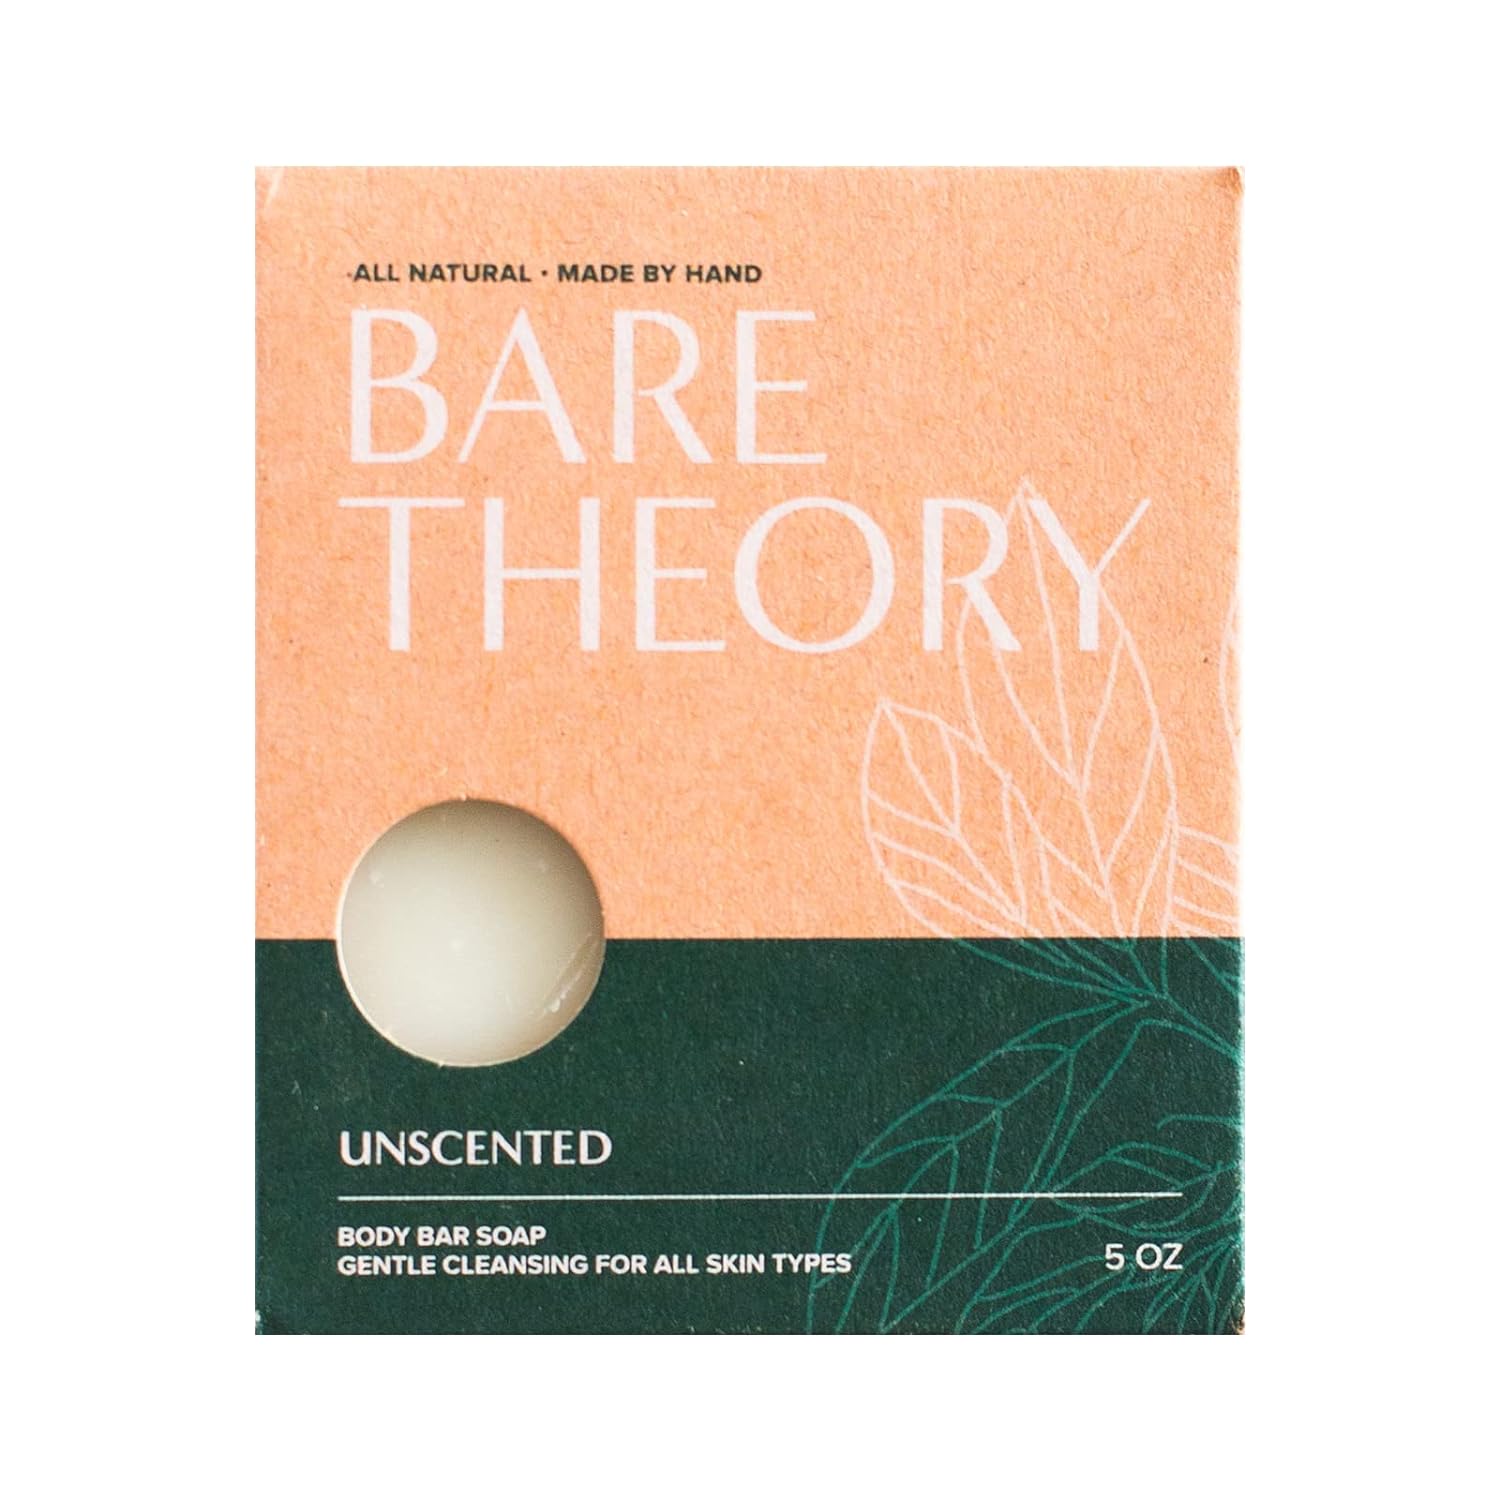 Bare Theory Moisturizing Bar Soap, Made with Cold Process for Optimal Goodness, Enriched with Nourishing Shea Butter, Olive Oil & Coconut Oil, Rejuvenating Soap for All Skin Types(Unscented)